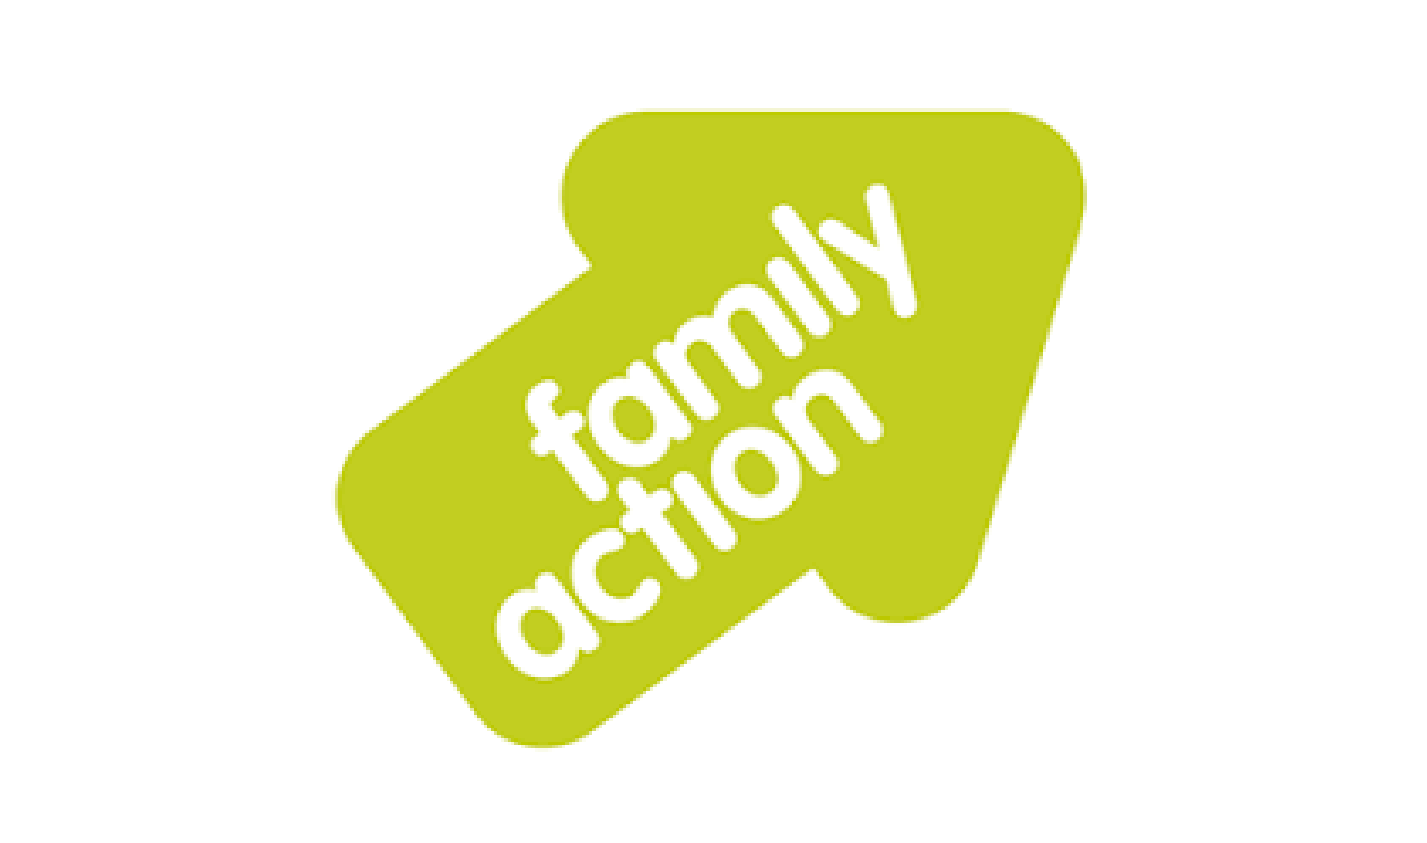 Fmaily Action logo-01